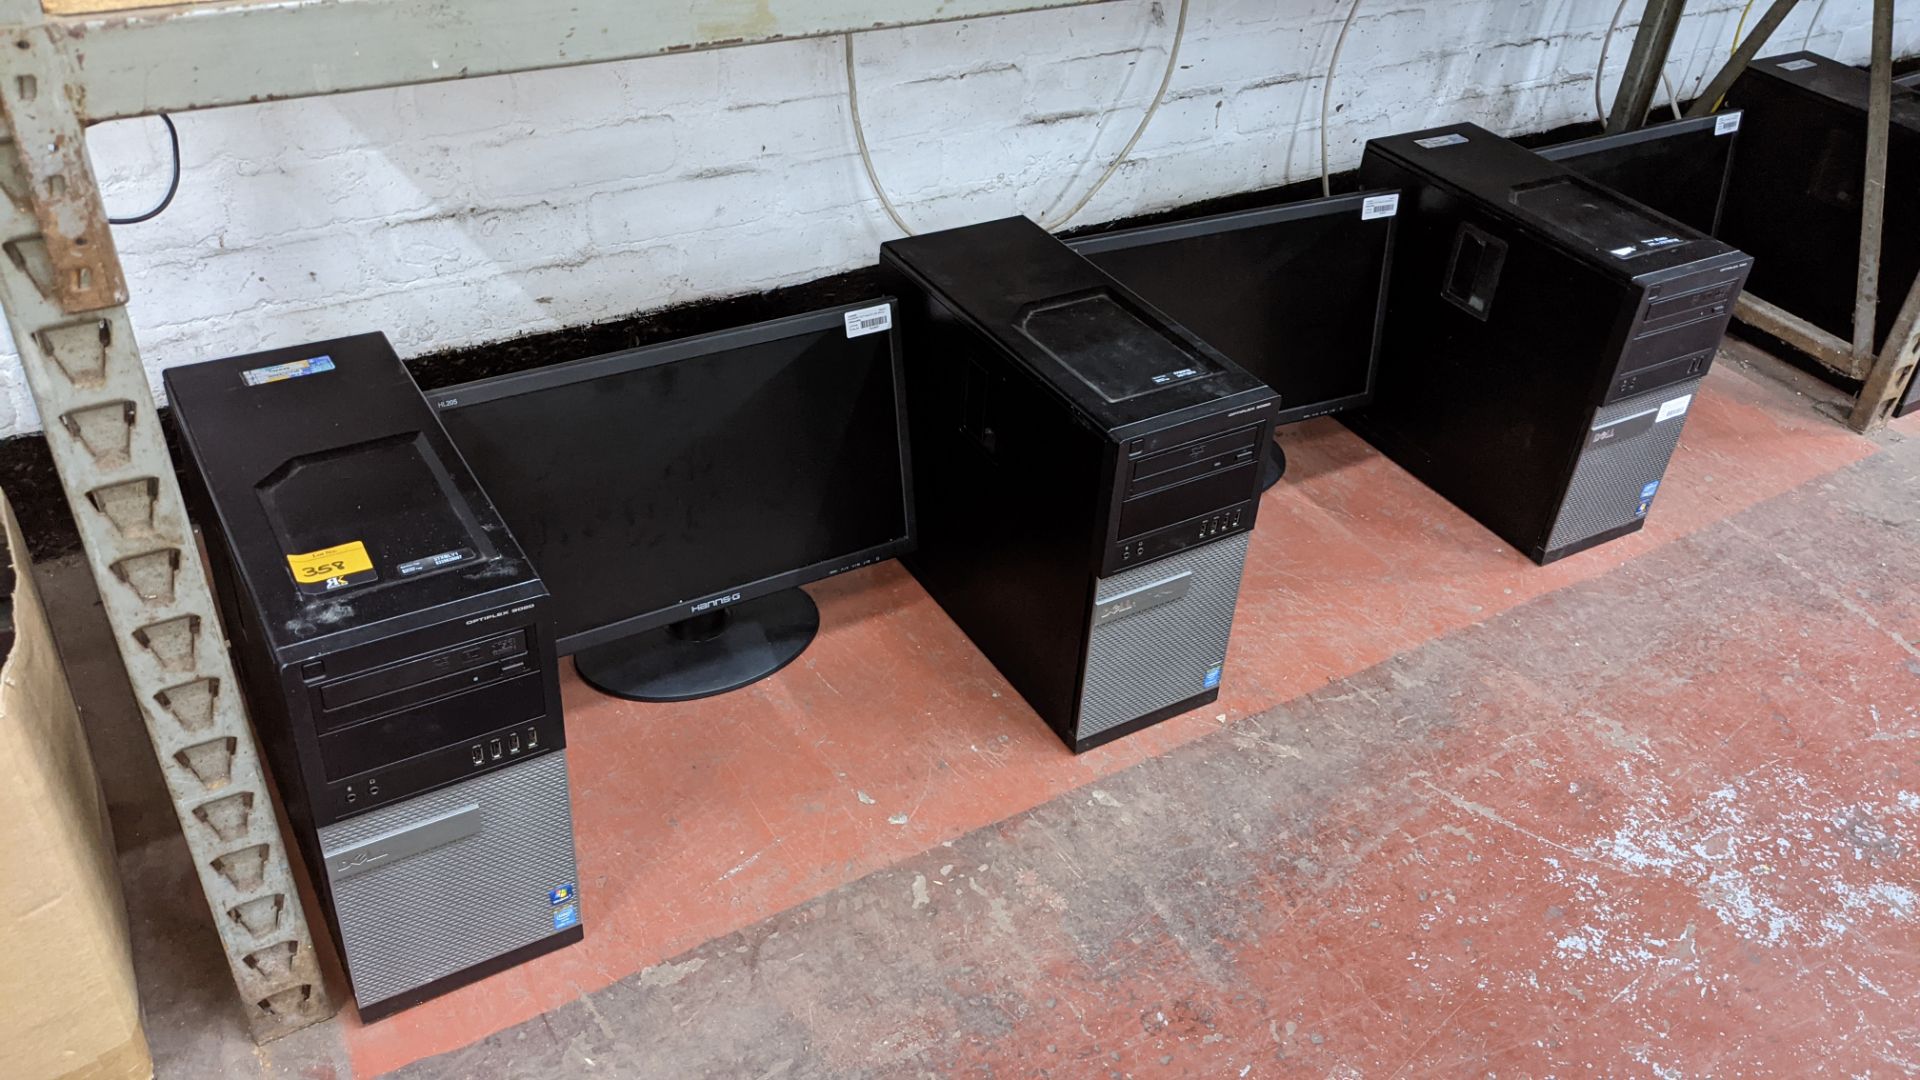 3 off Dell Optiplex assorted tower computers, each with monitor - no cables, keyboards, mice or othe - Image 2 of 10